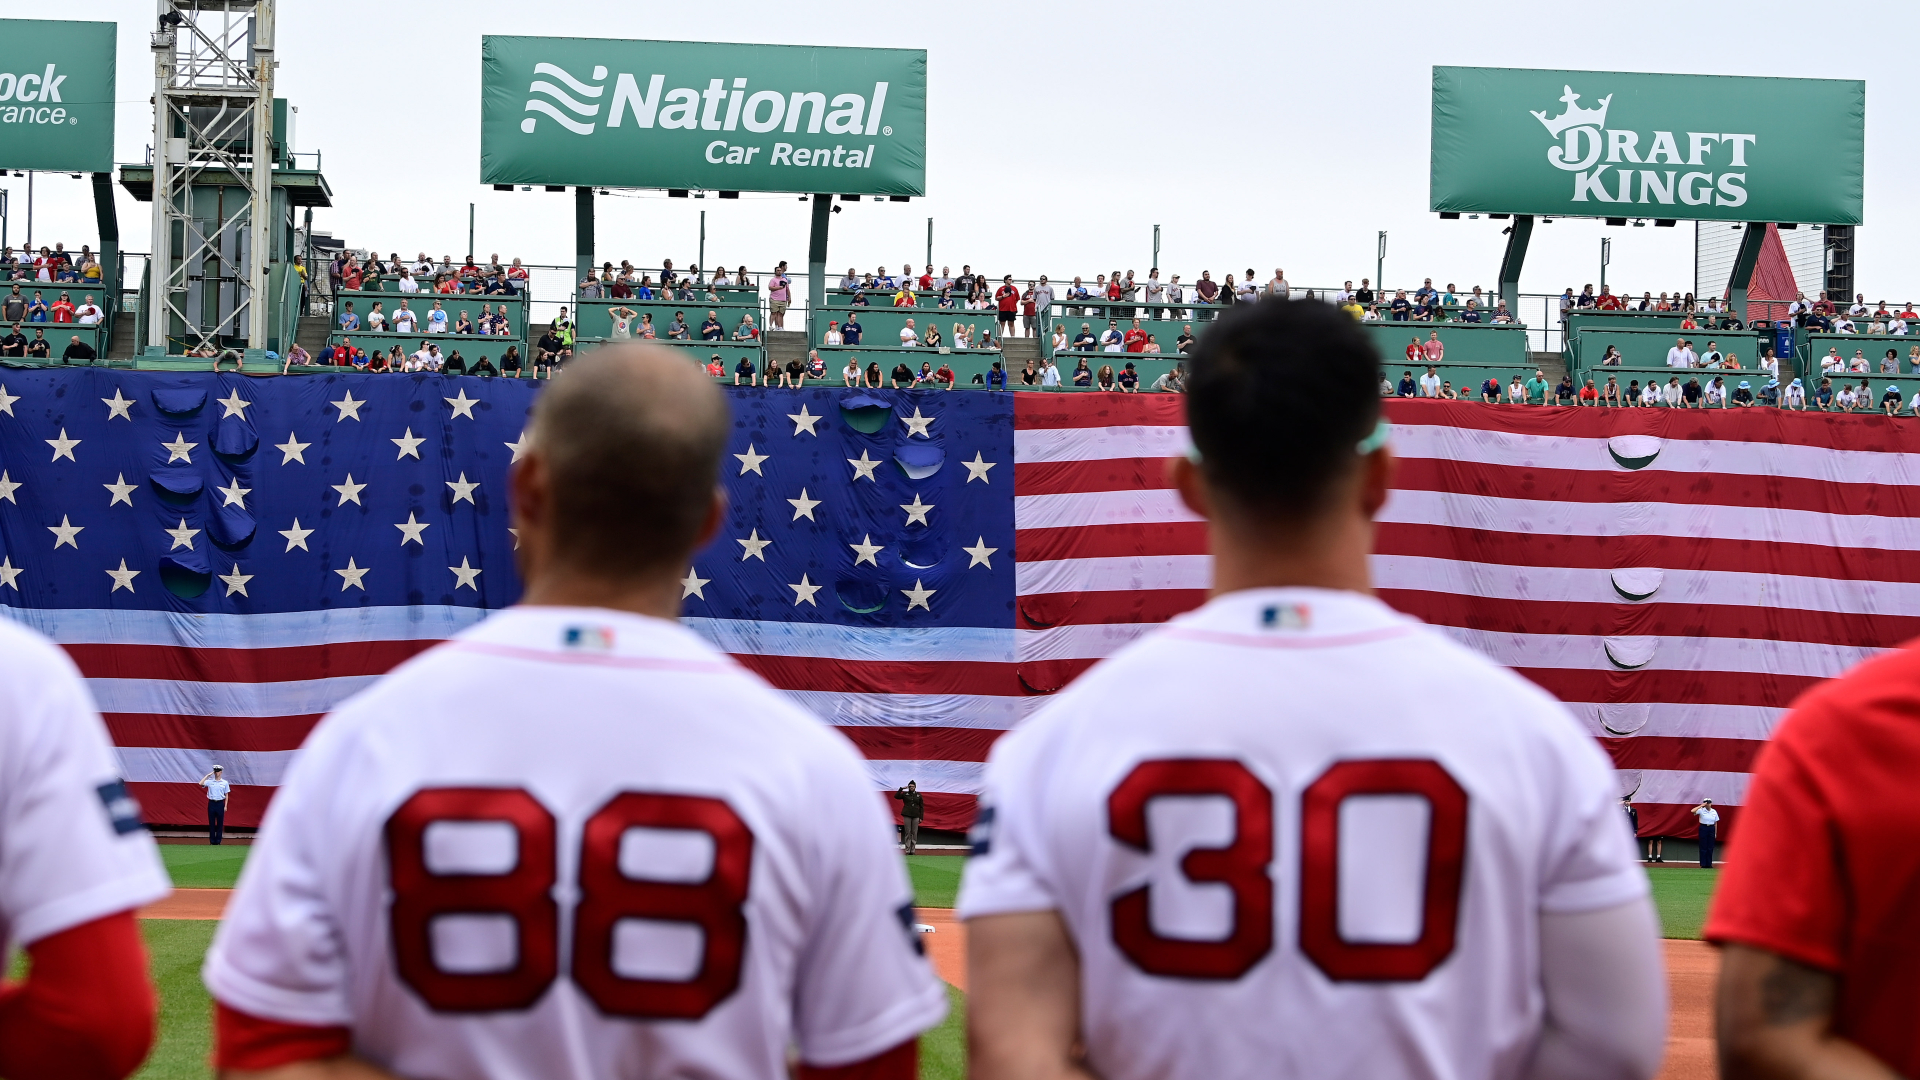 Red Sox Hilariously Struggle To Guess Height Of Green Monster